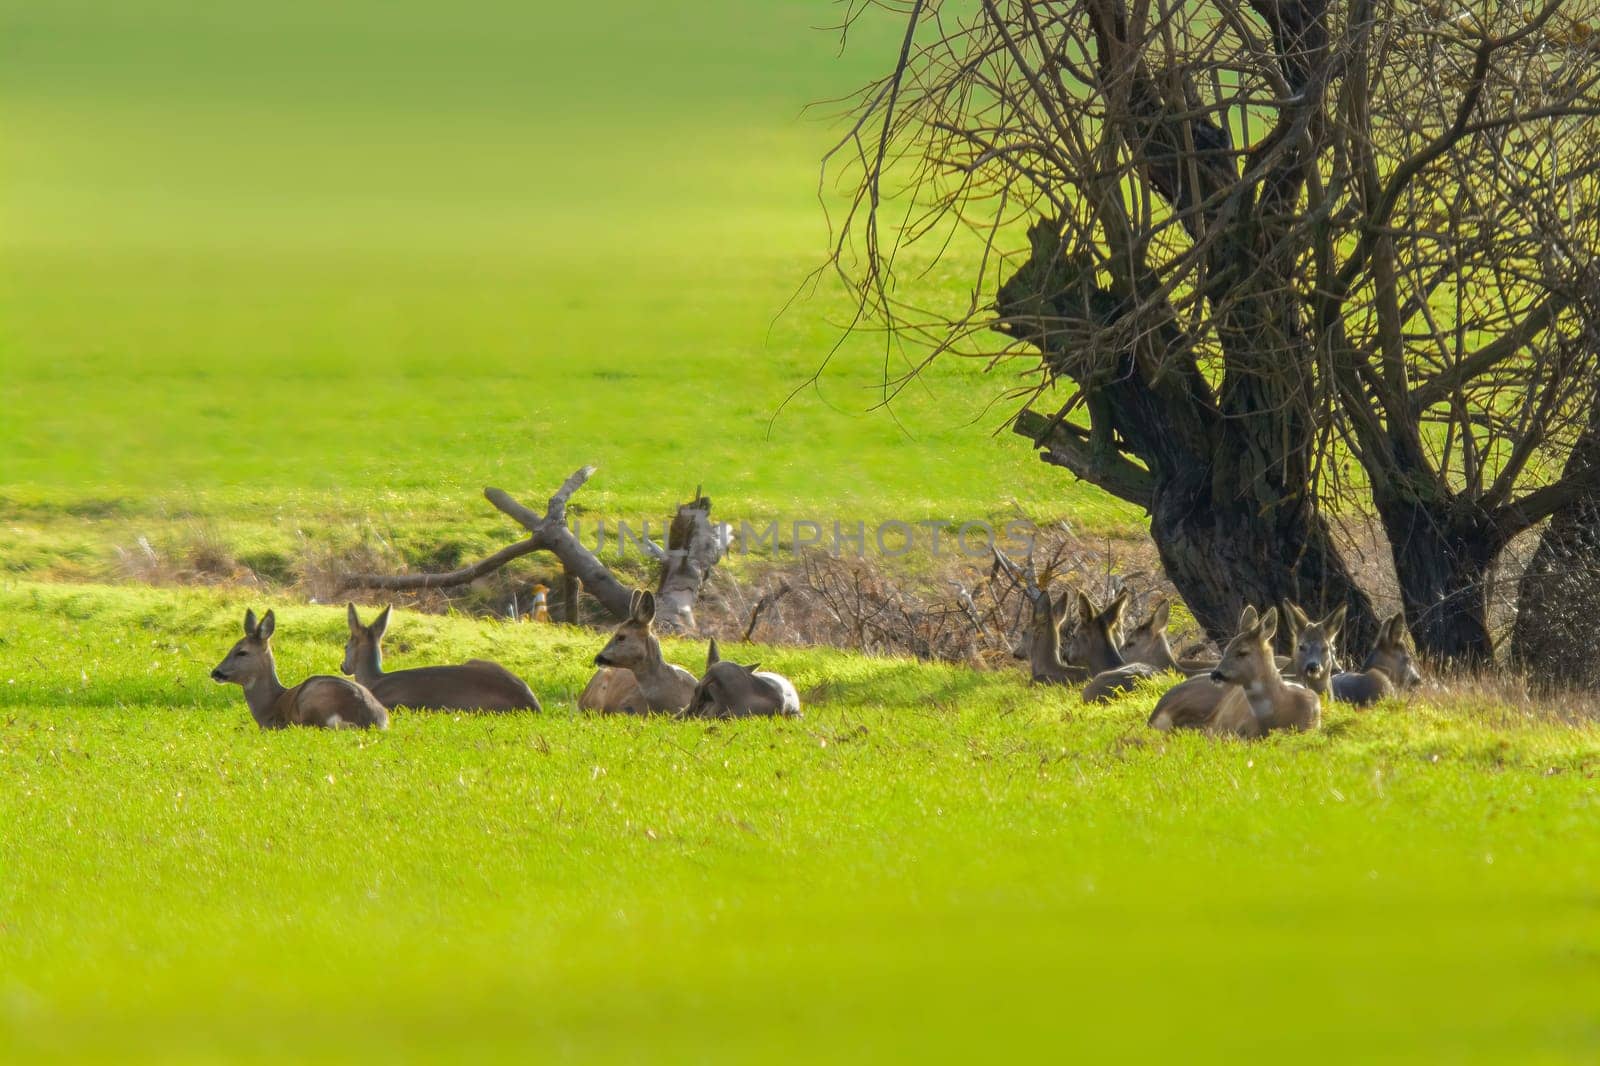 a group of deer in a field in spring by mario_plechaty_photography